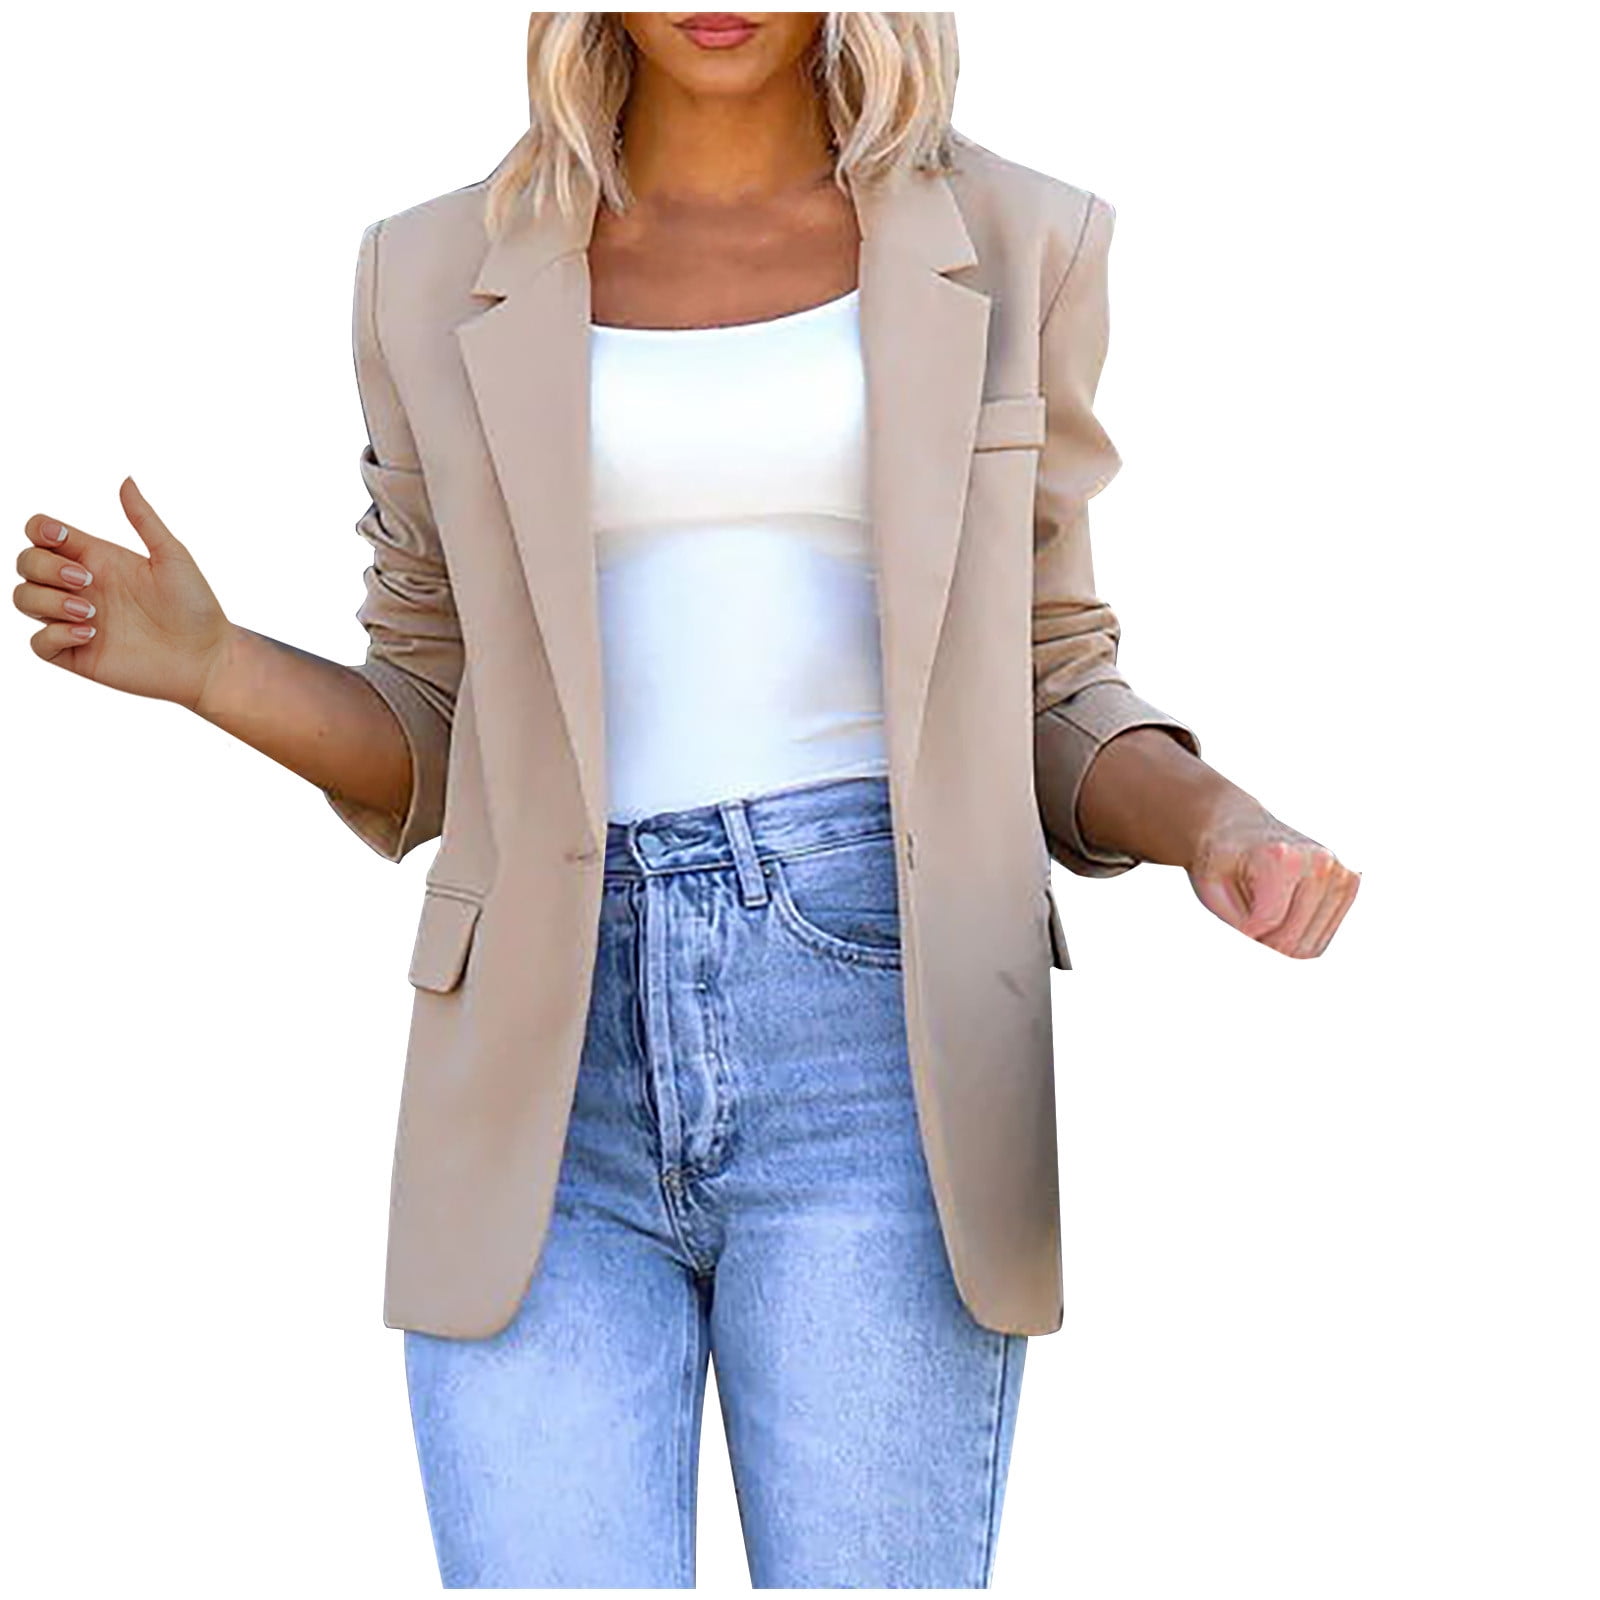 Smihono Women's Fashion Motorcycle Jacket Leather Jacket Coat Clearance Long Sleeve Womens Suit Slim Solid Business Trendy Work Lapel Collar Office